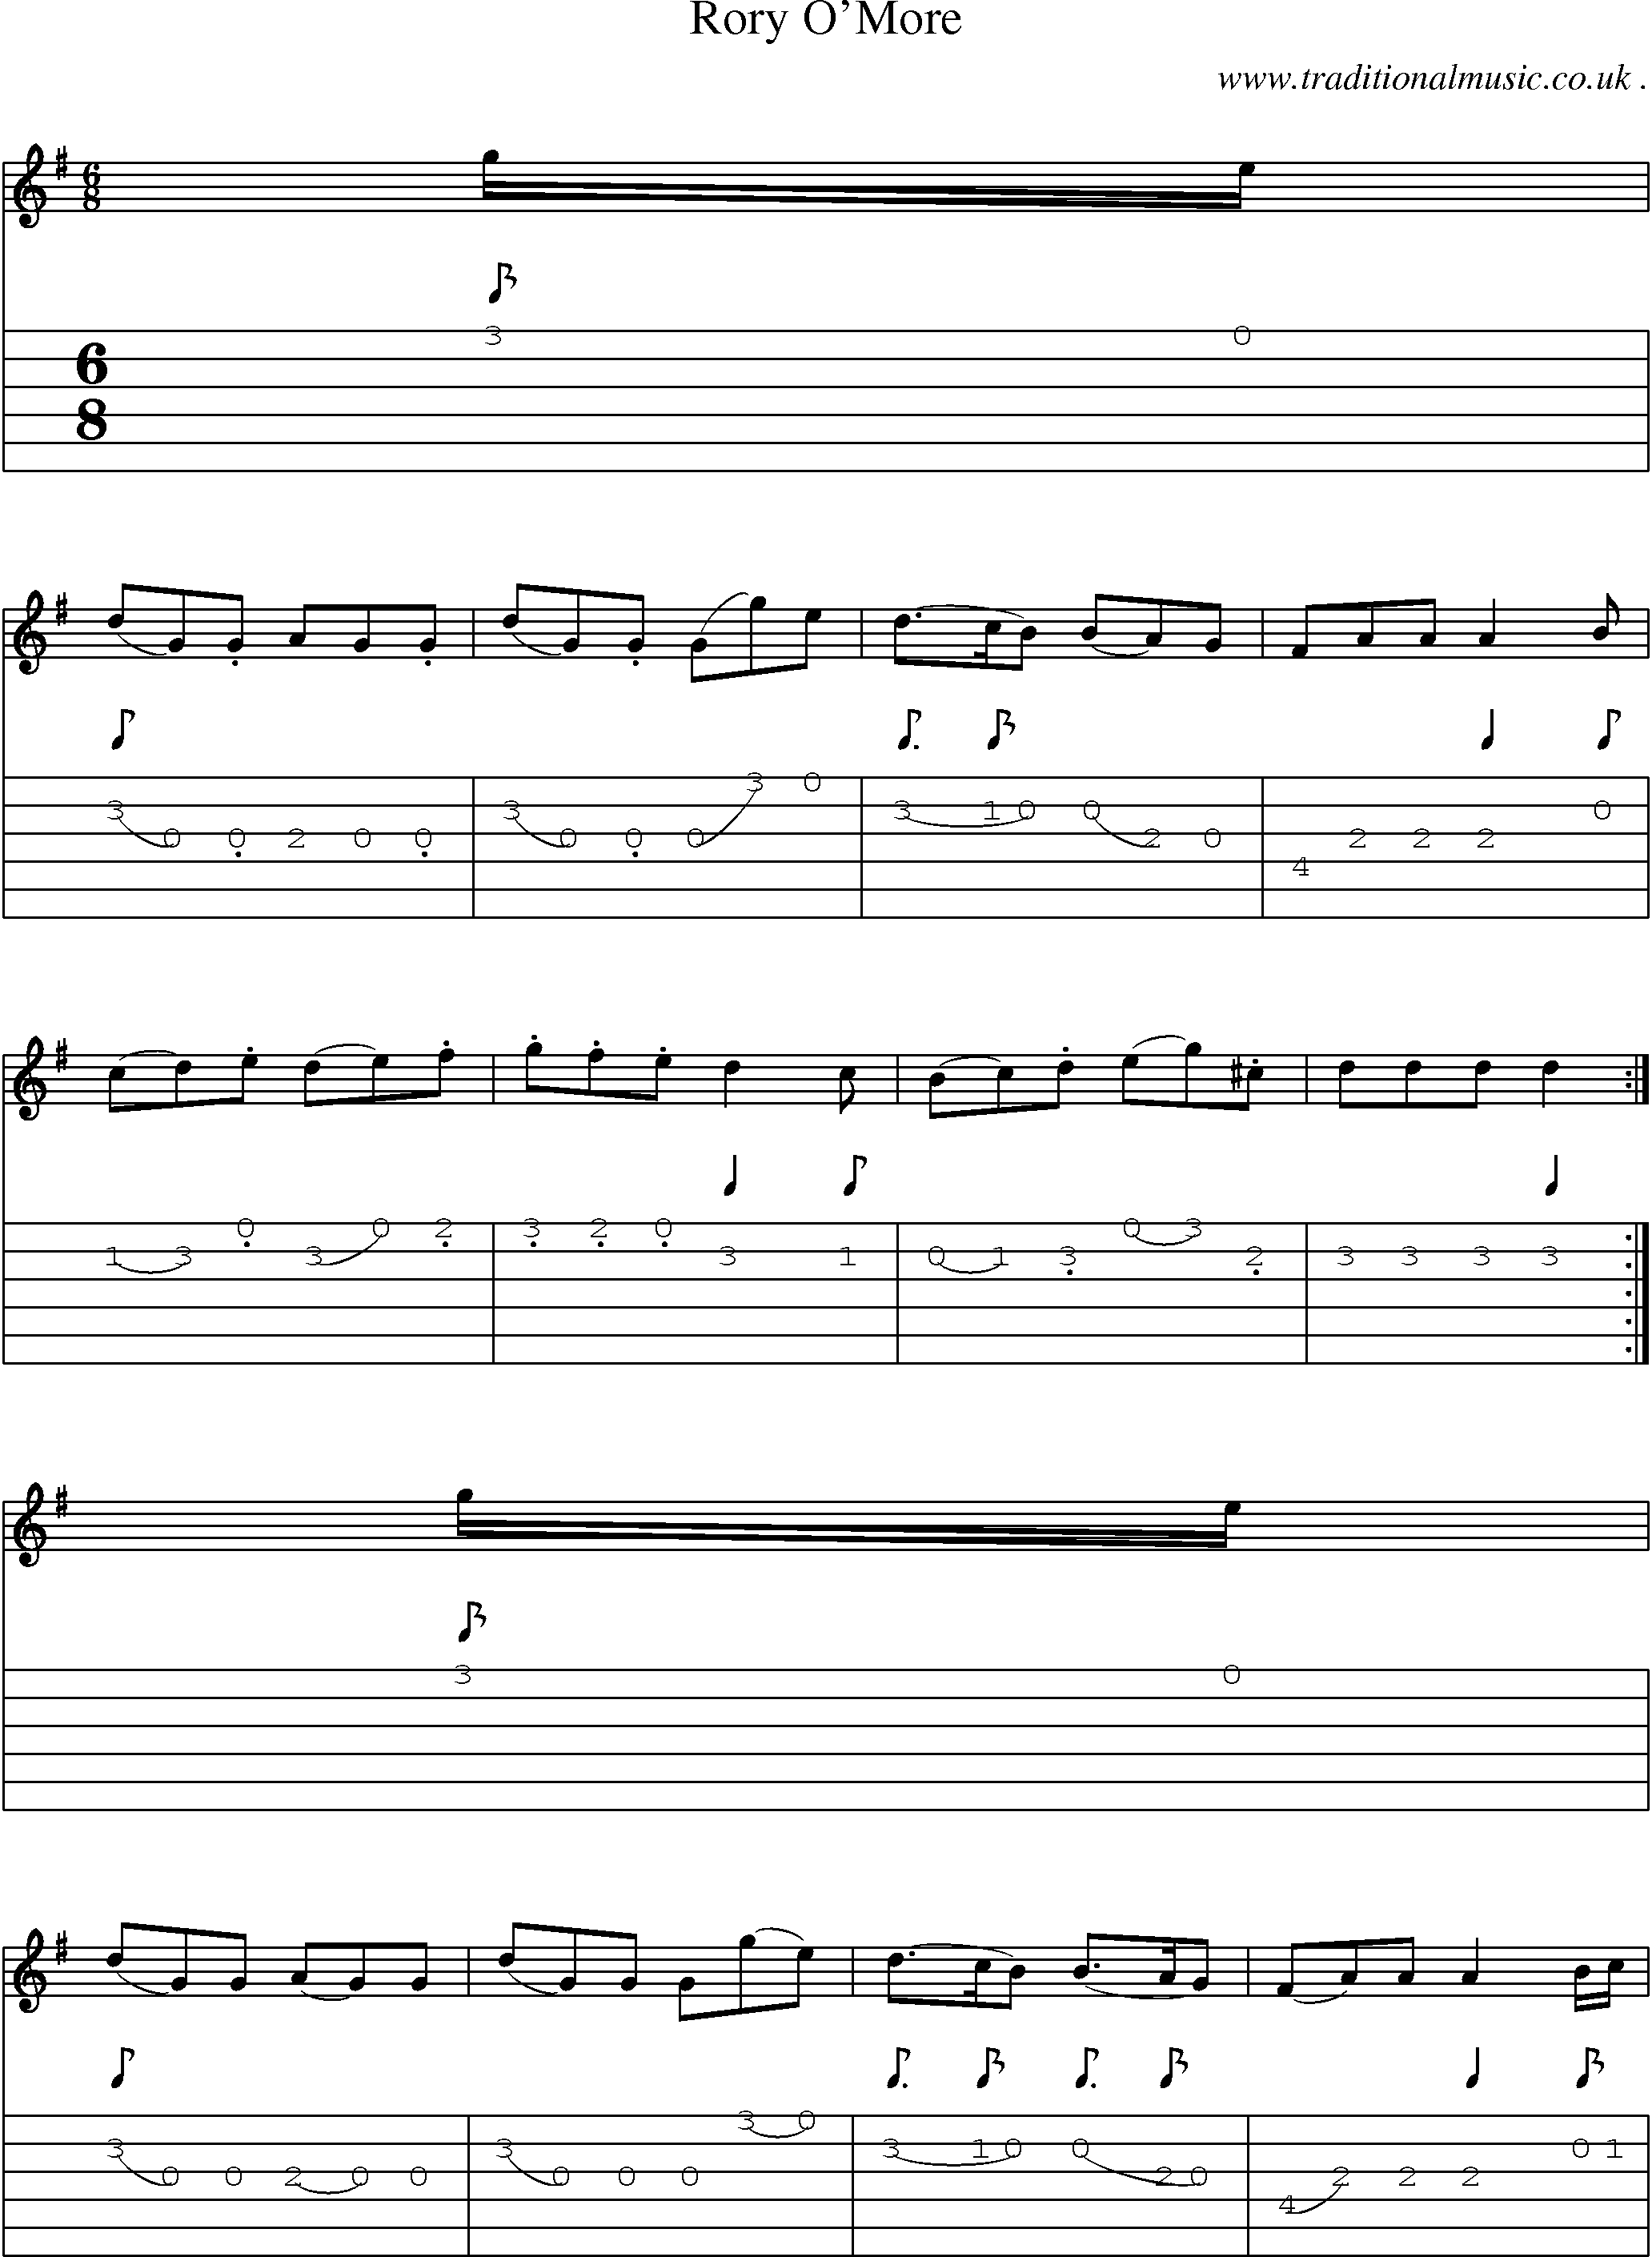 Sheet-Music and Guitar Tabs for Rory Omore